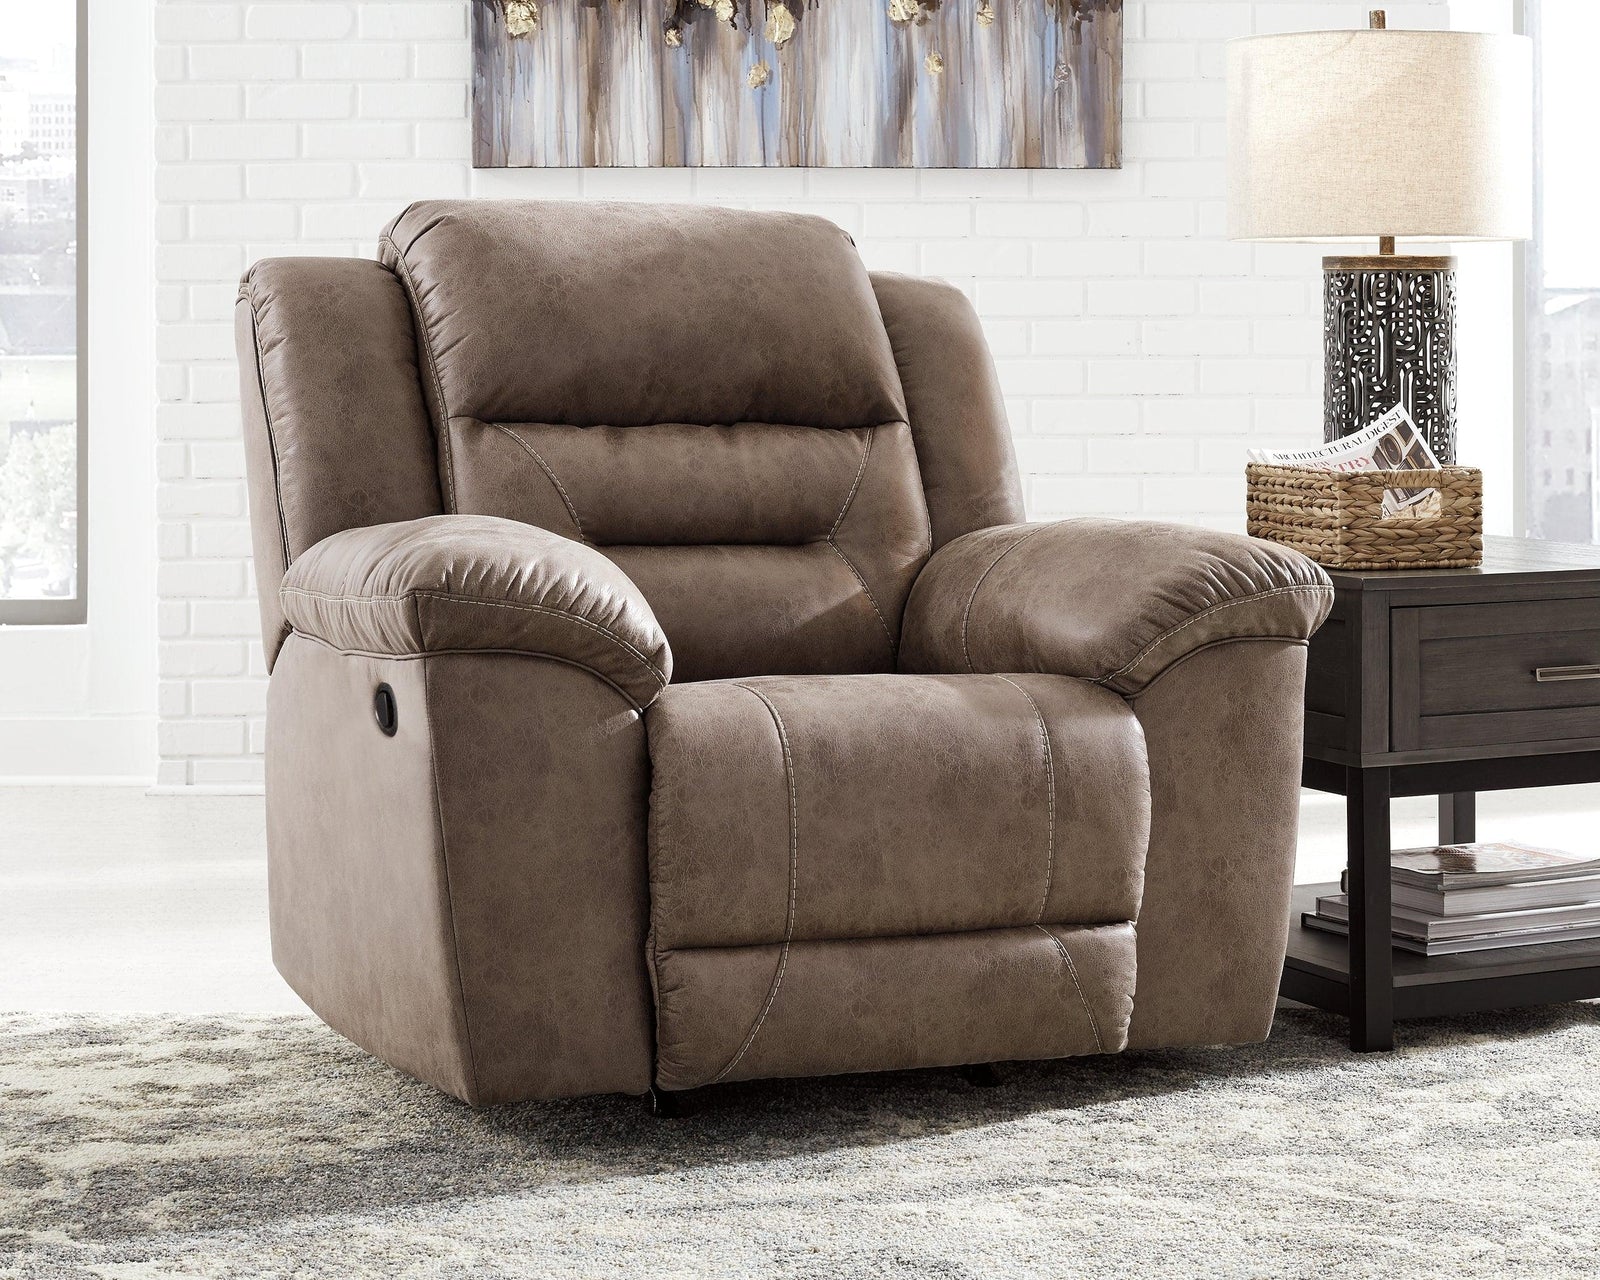 Stoneland Fossil Faux Leather Recliner